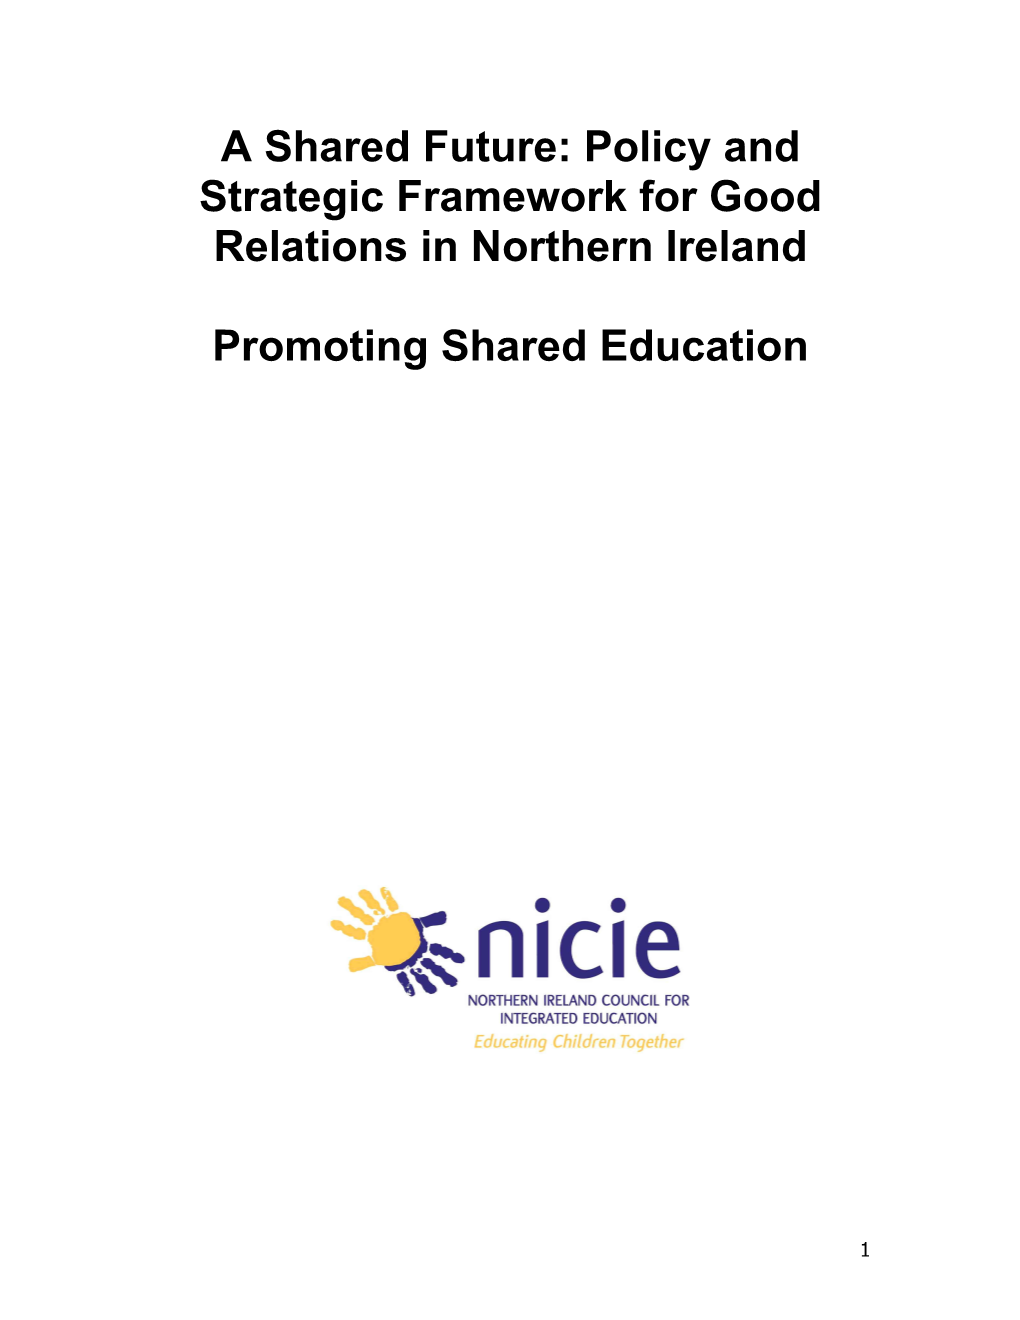 A Shared Future: Policy and Strategic Framework for Good Relations in Northern Ireland